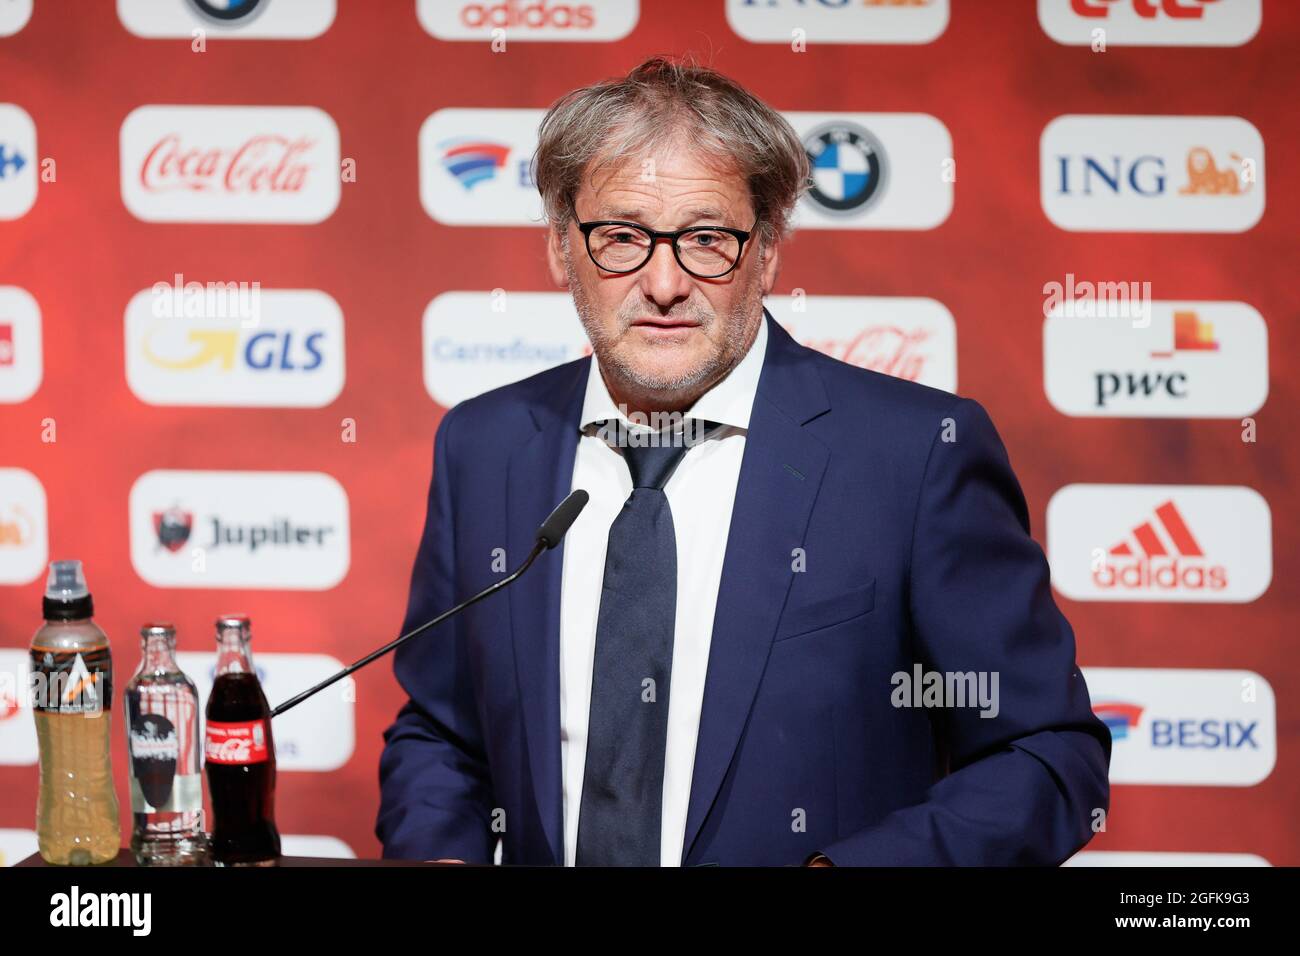 Belgium's u21 head coach Jacky Mathijssen pictured during a press conference of Belgian national soccer team Red Devils to announce the selection for Stock Photo